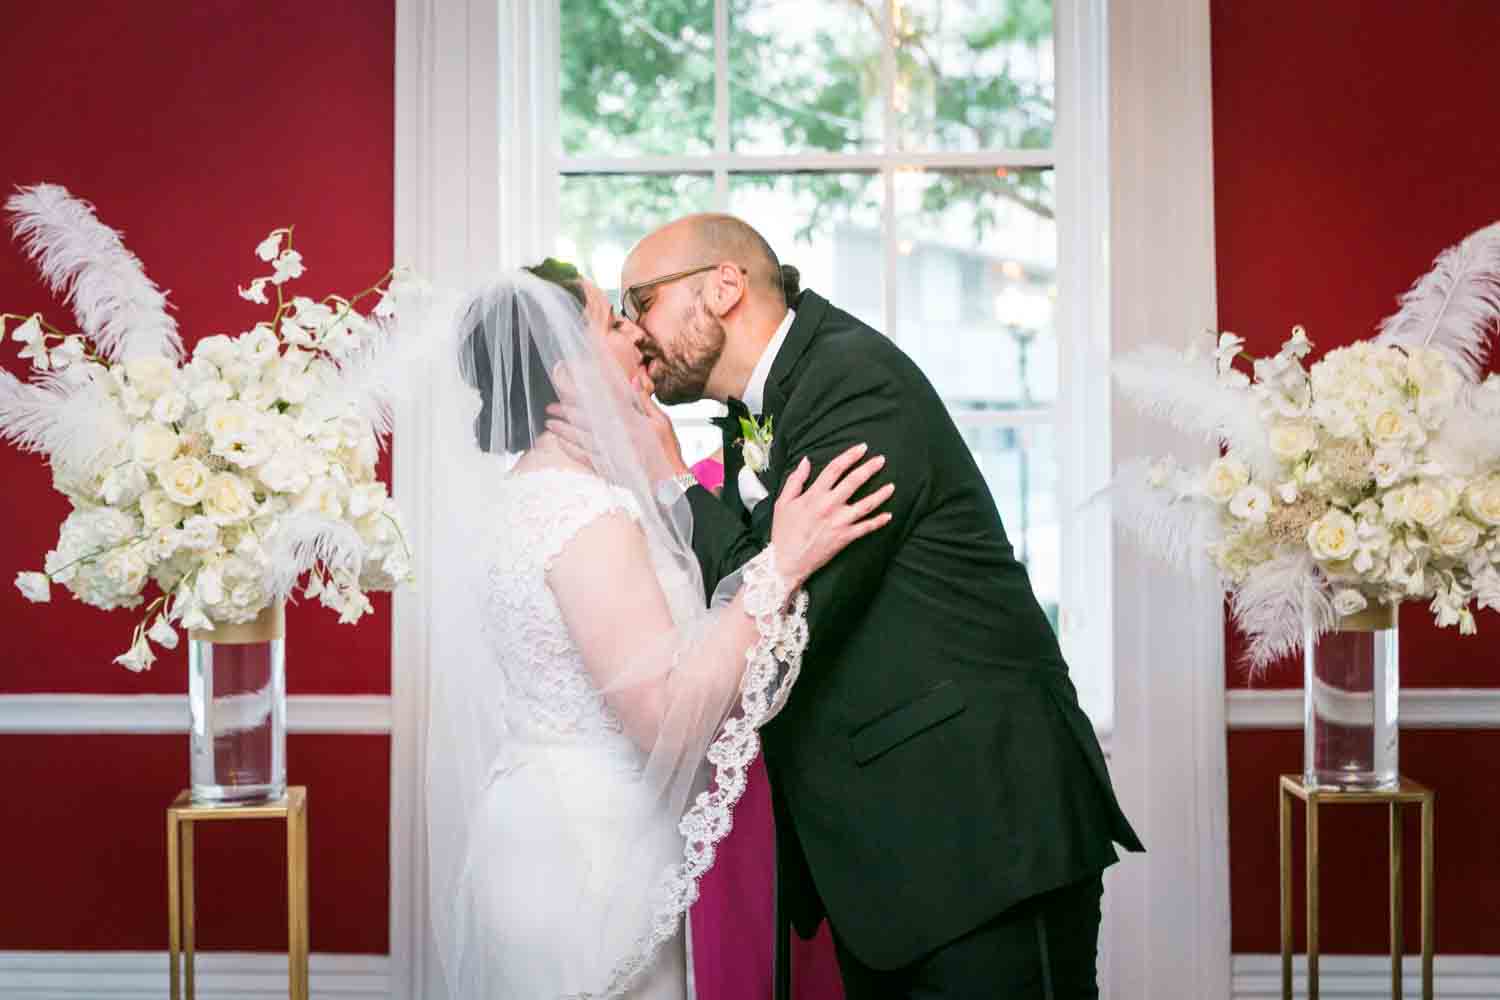 India House wedding photos of bride and groom kissing at end of ceremony